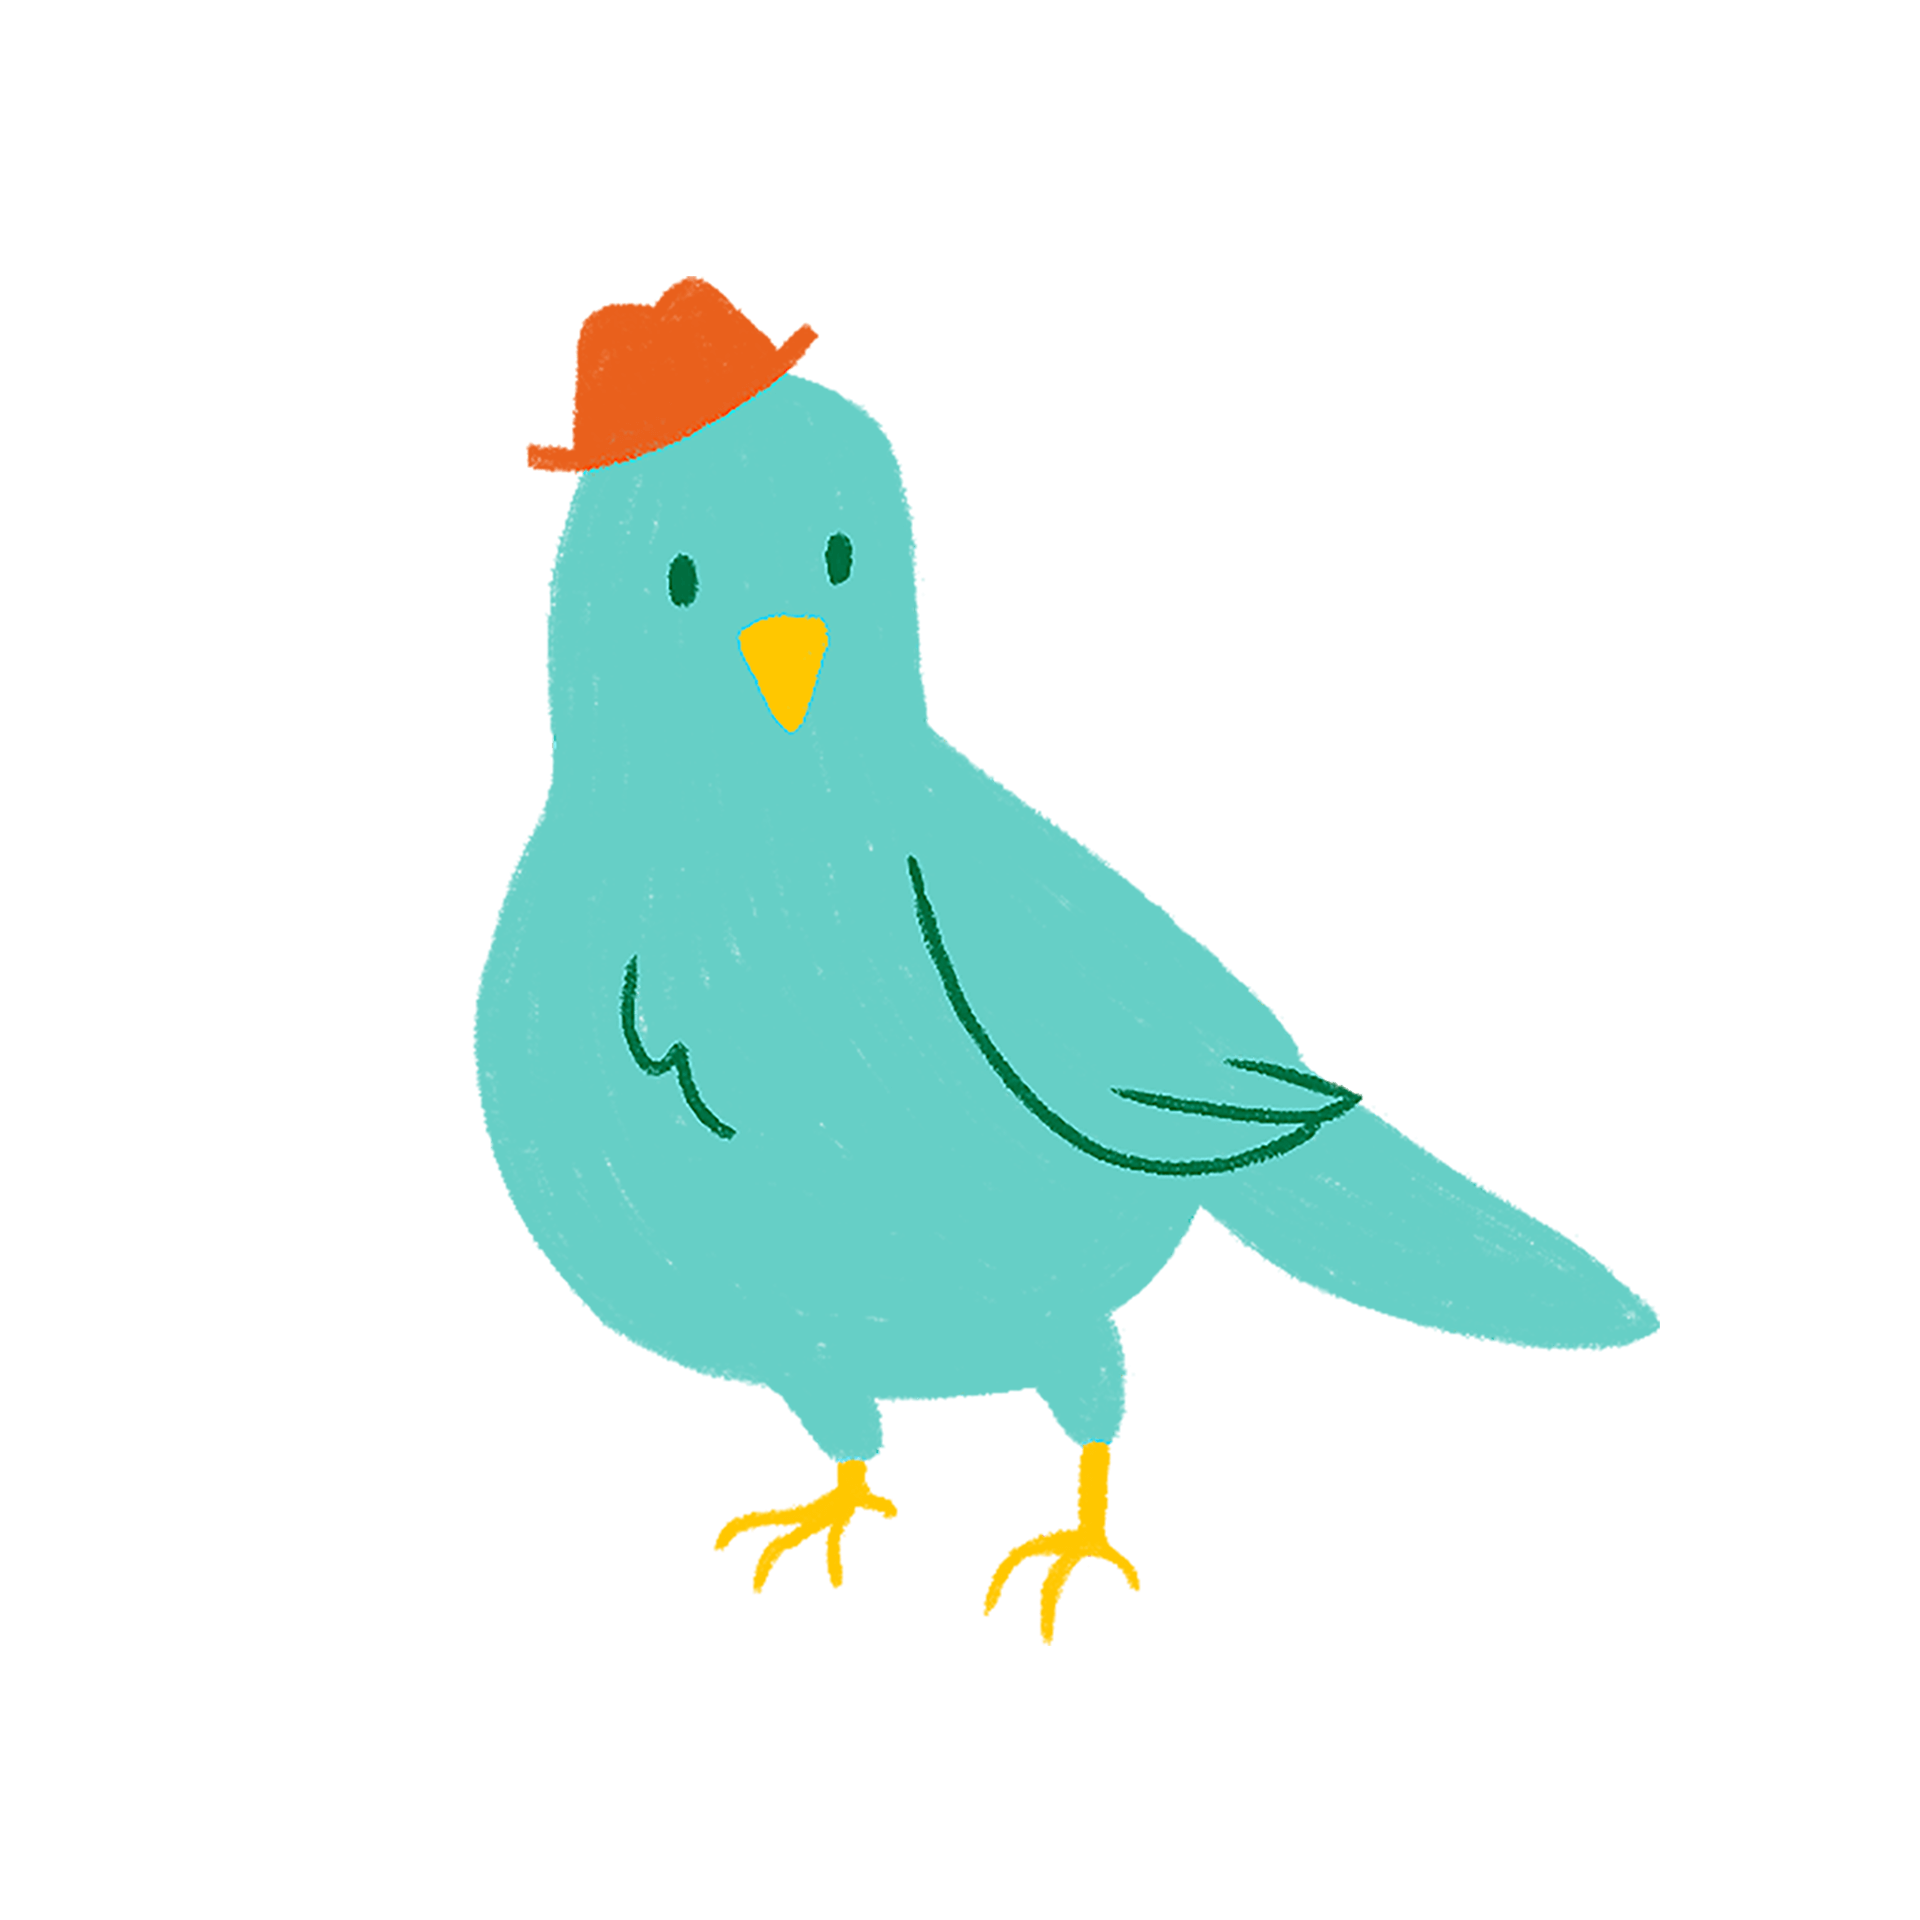 An illustration of a blue bird with a red hat on